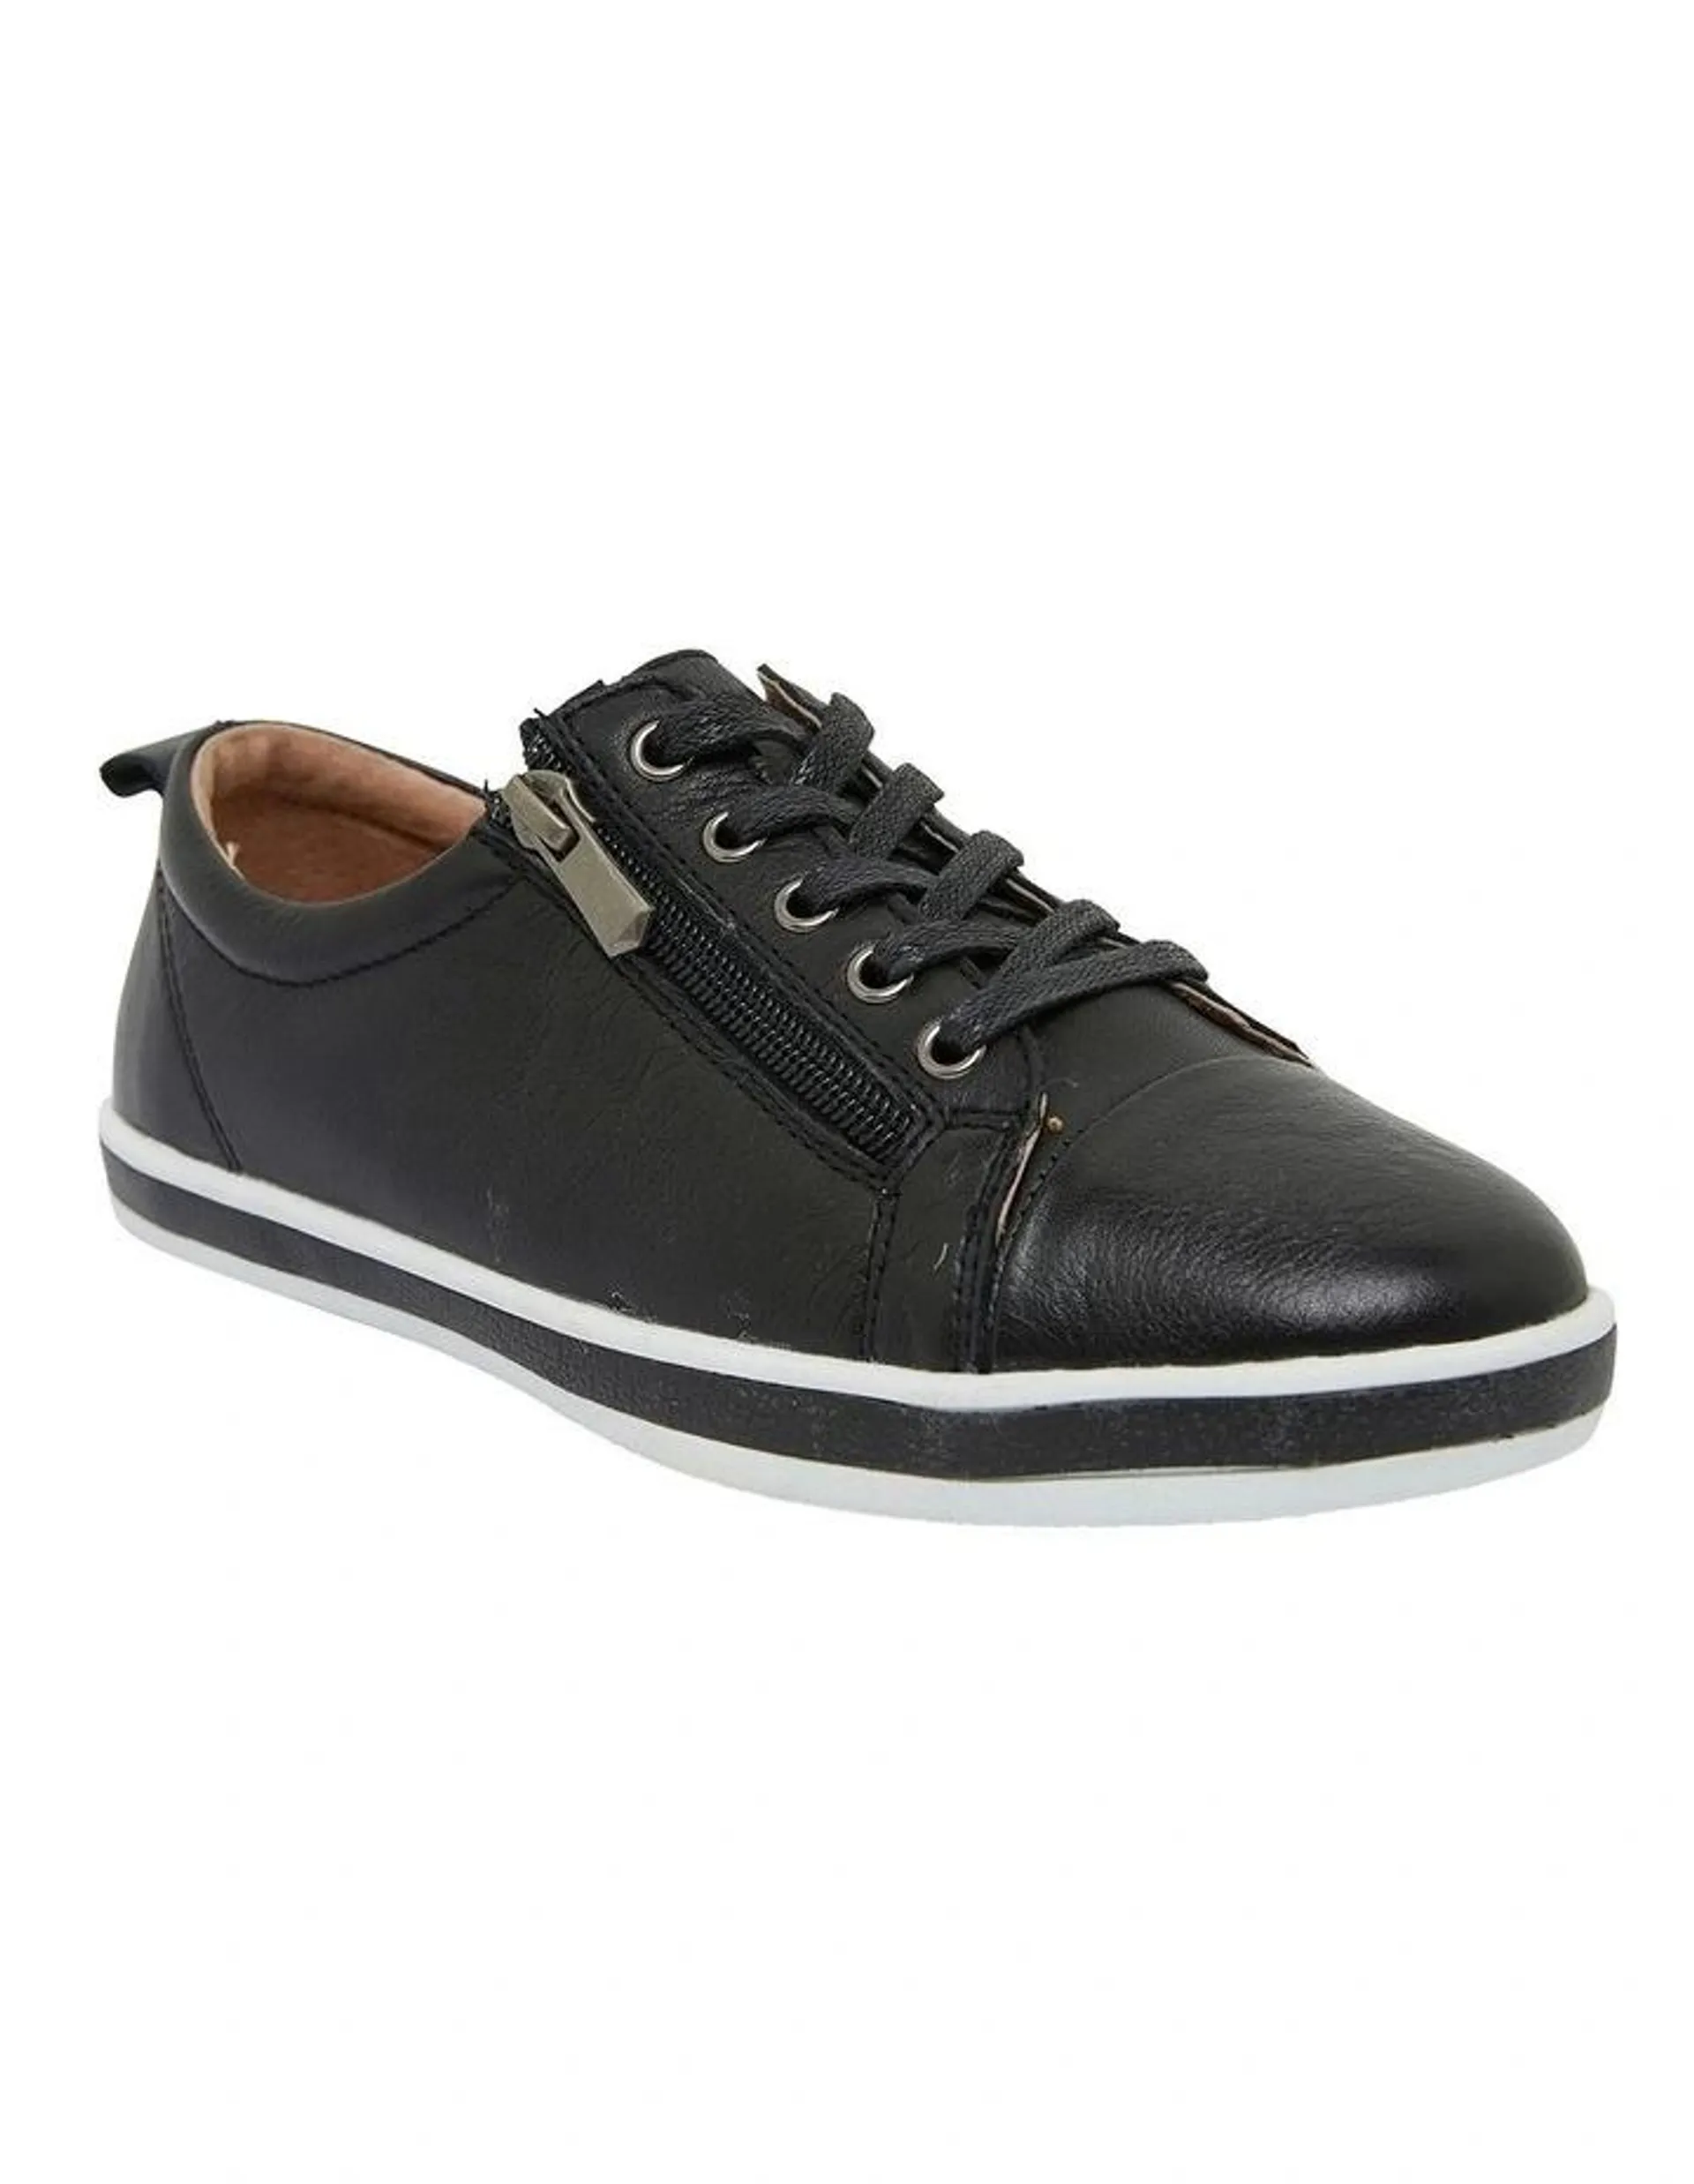 Whisper Sneakers in Black Leather